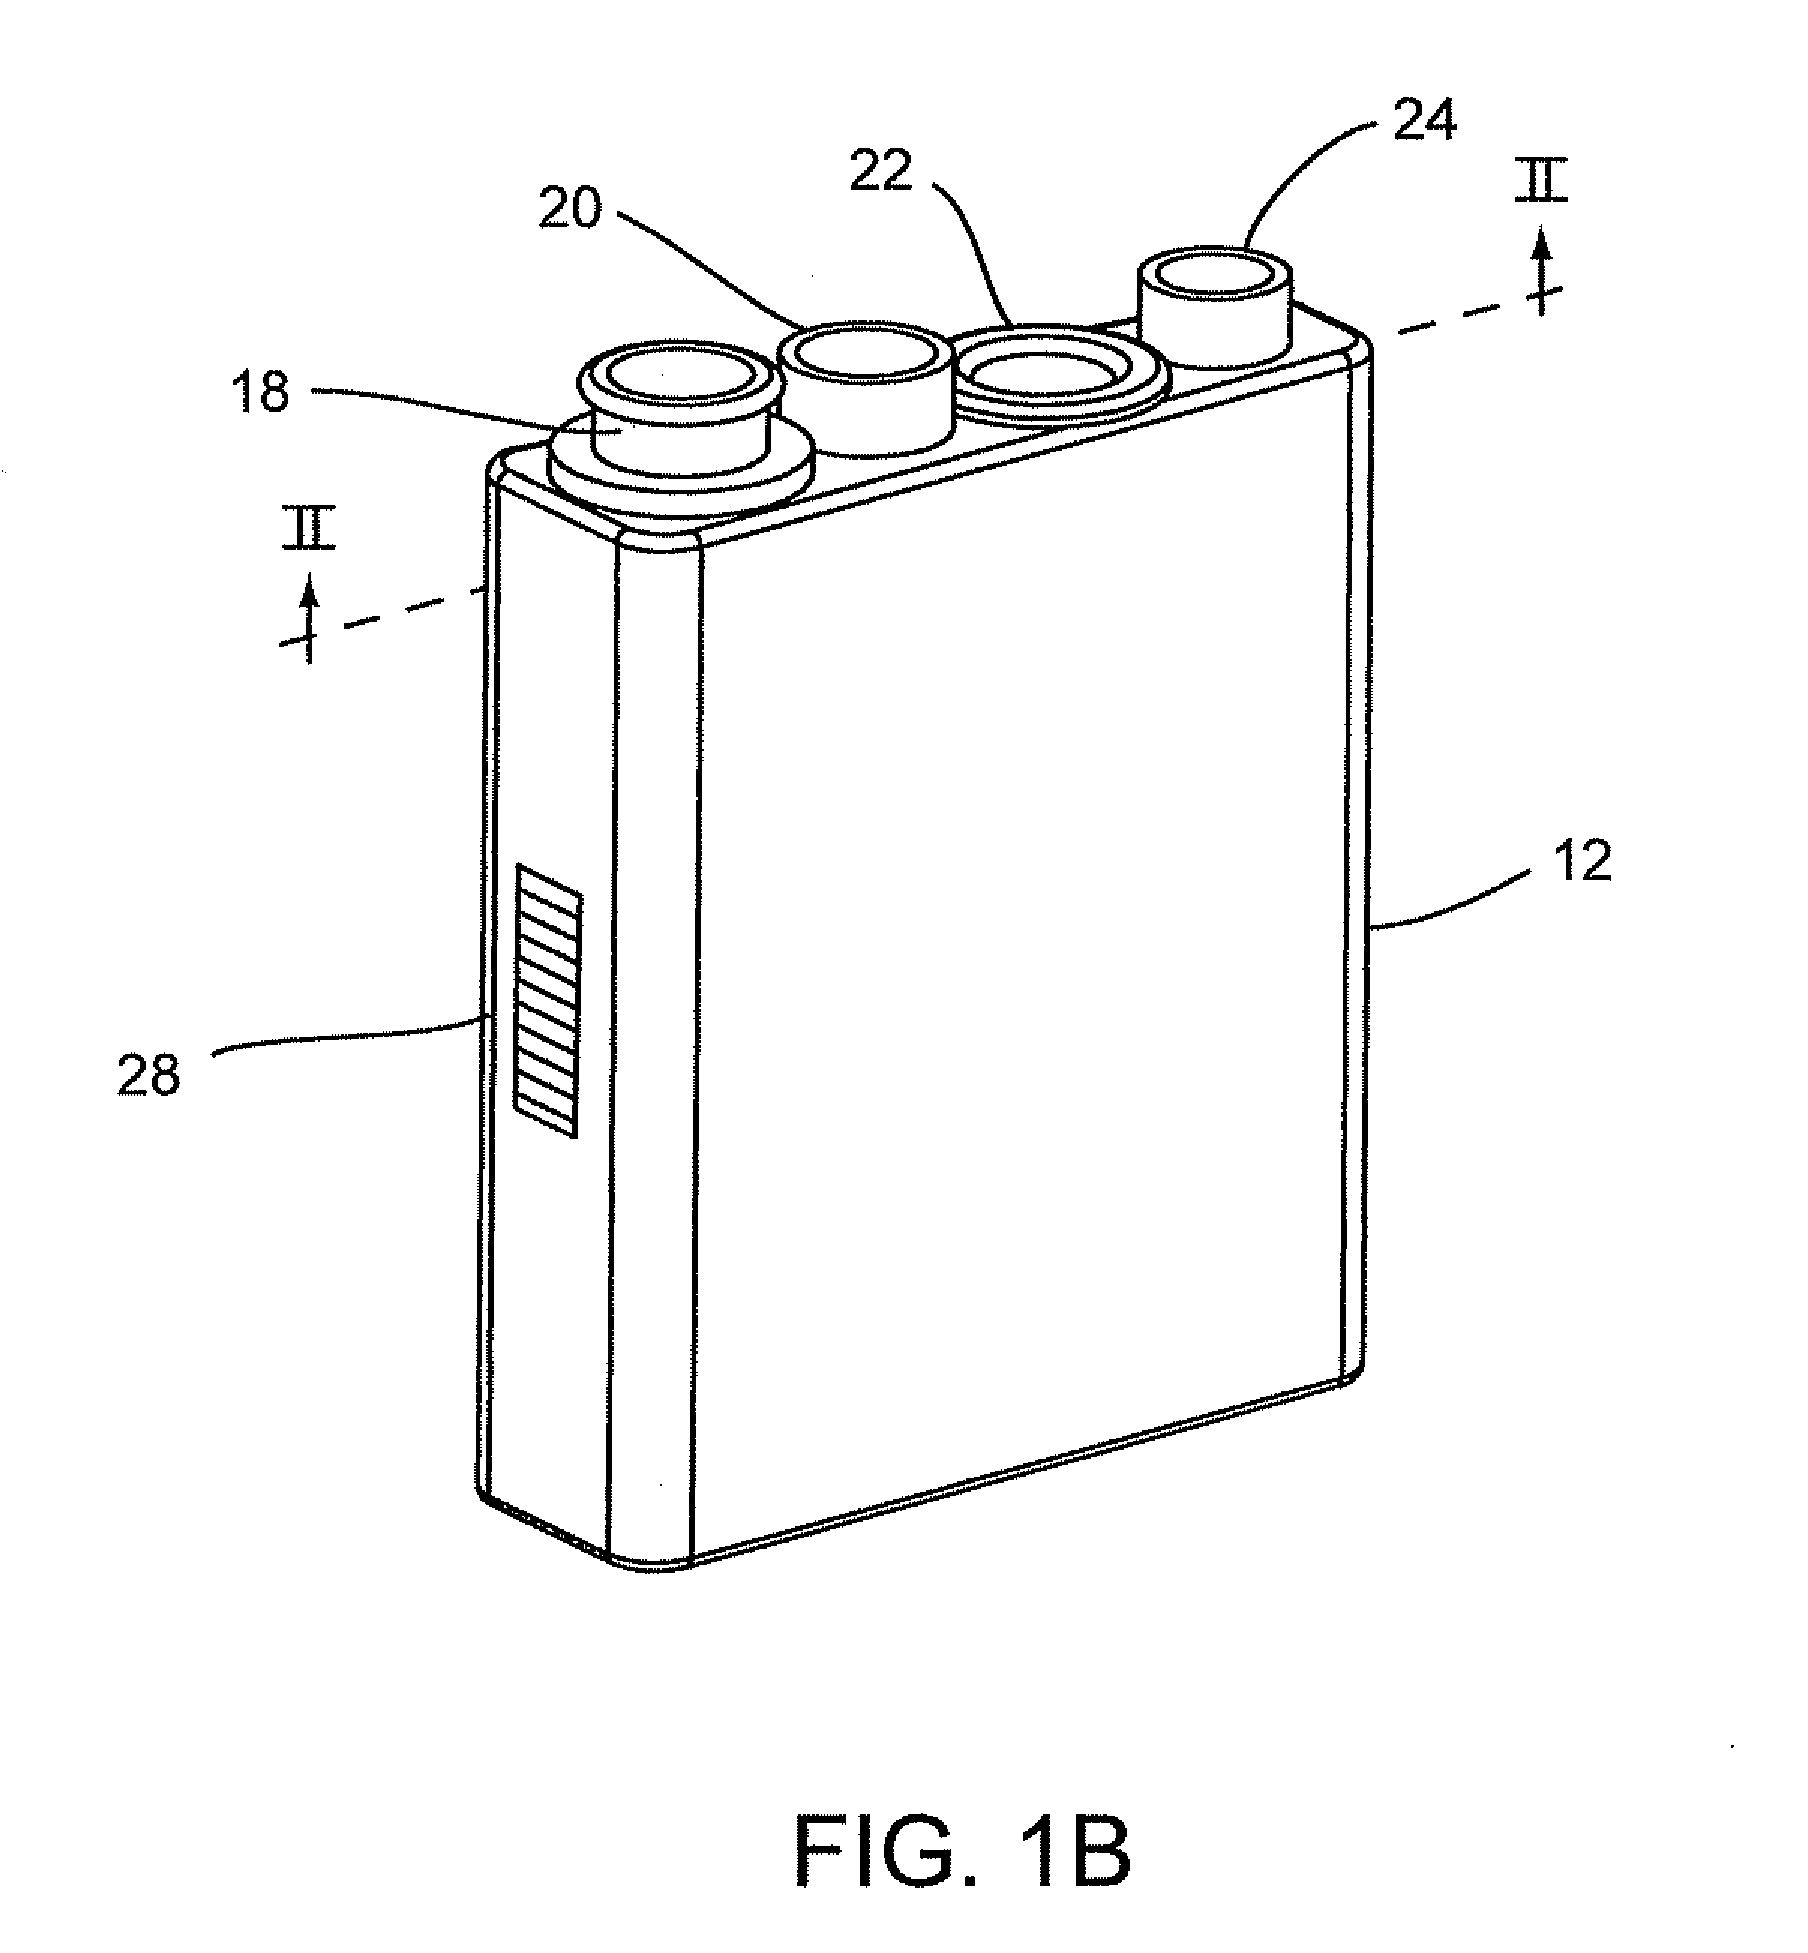 System for Conducting the Identification of Bacteria in Urine